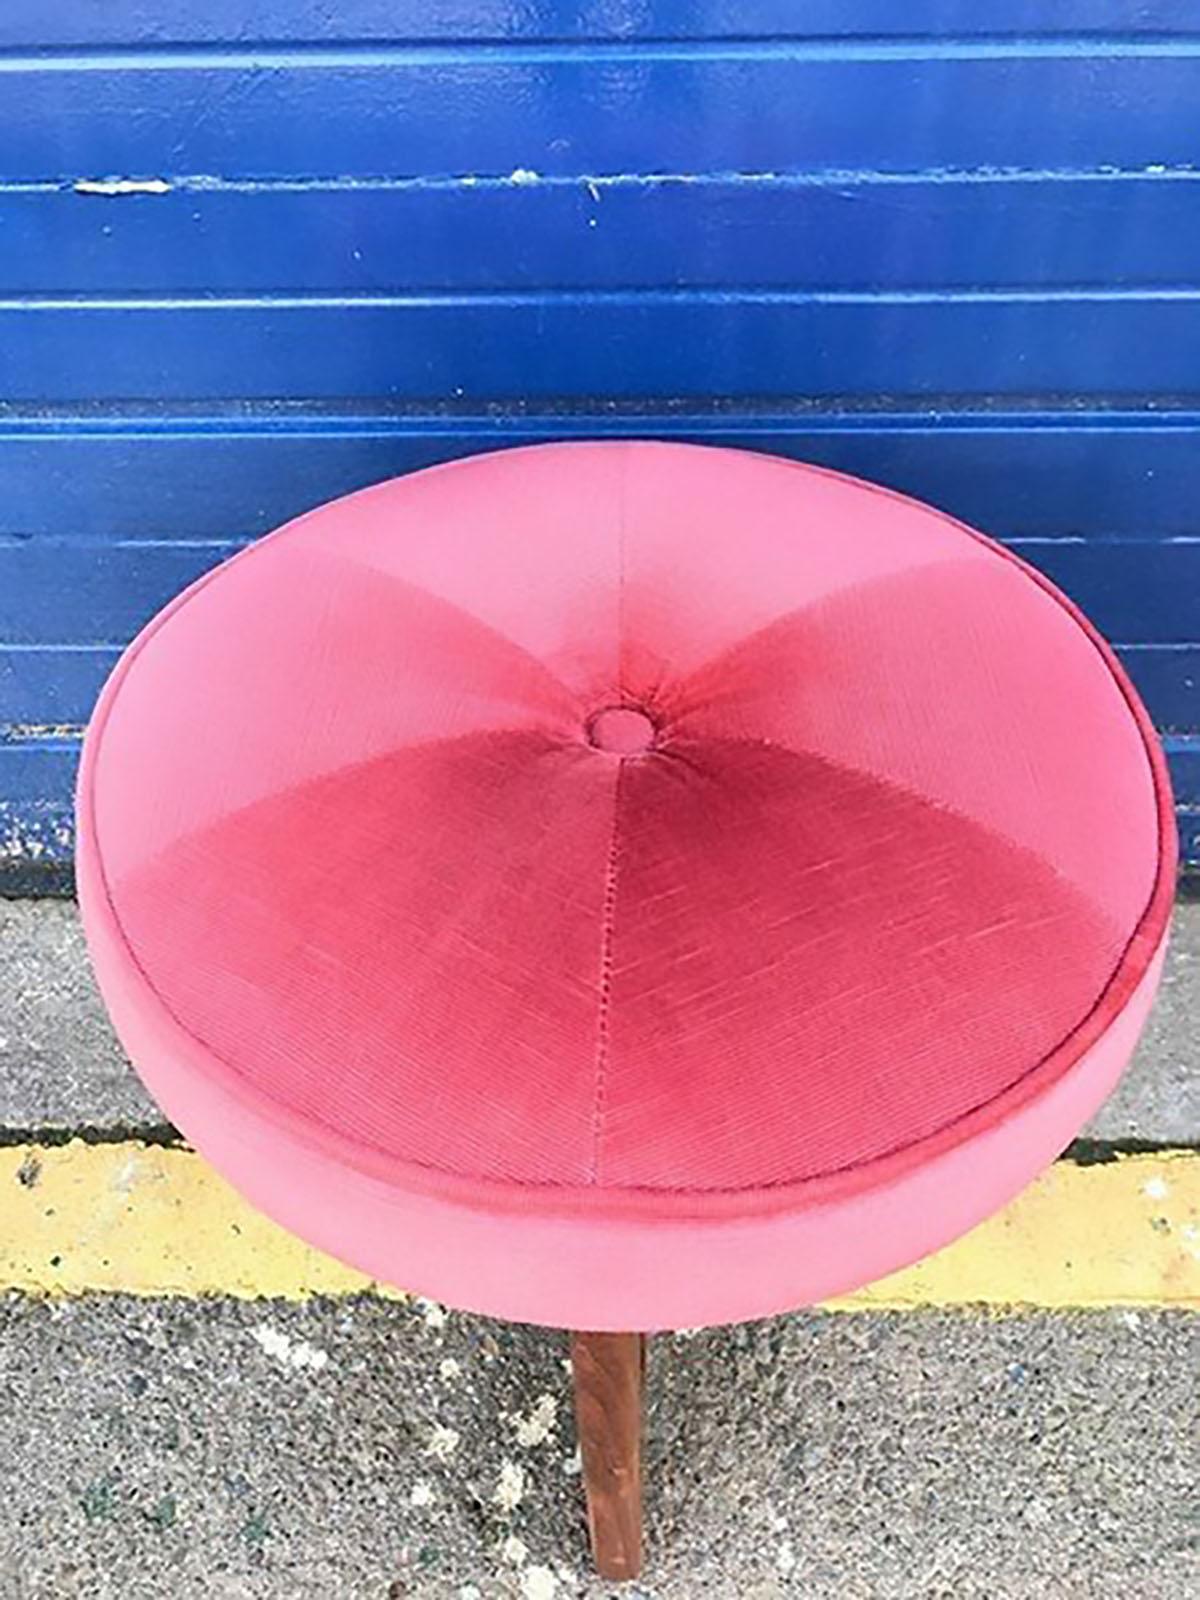 A stunning 1960s G Plan teak stool design by Danish designer Kofod Larsen for G Plan.
The teak base is in excellent condition. The upholstery is the new pink fabric.

Measures approximate 20 inches round and 18 inches tall.